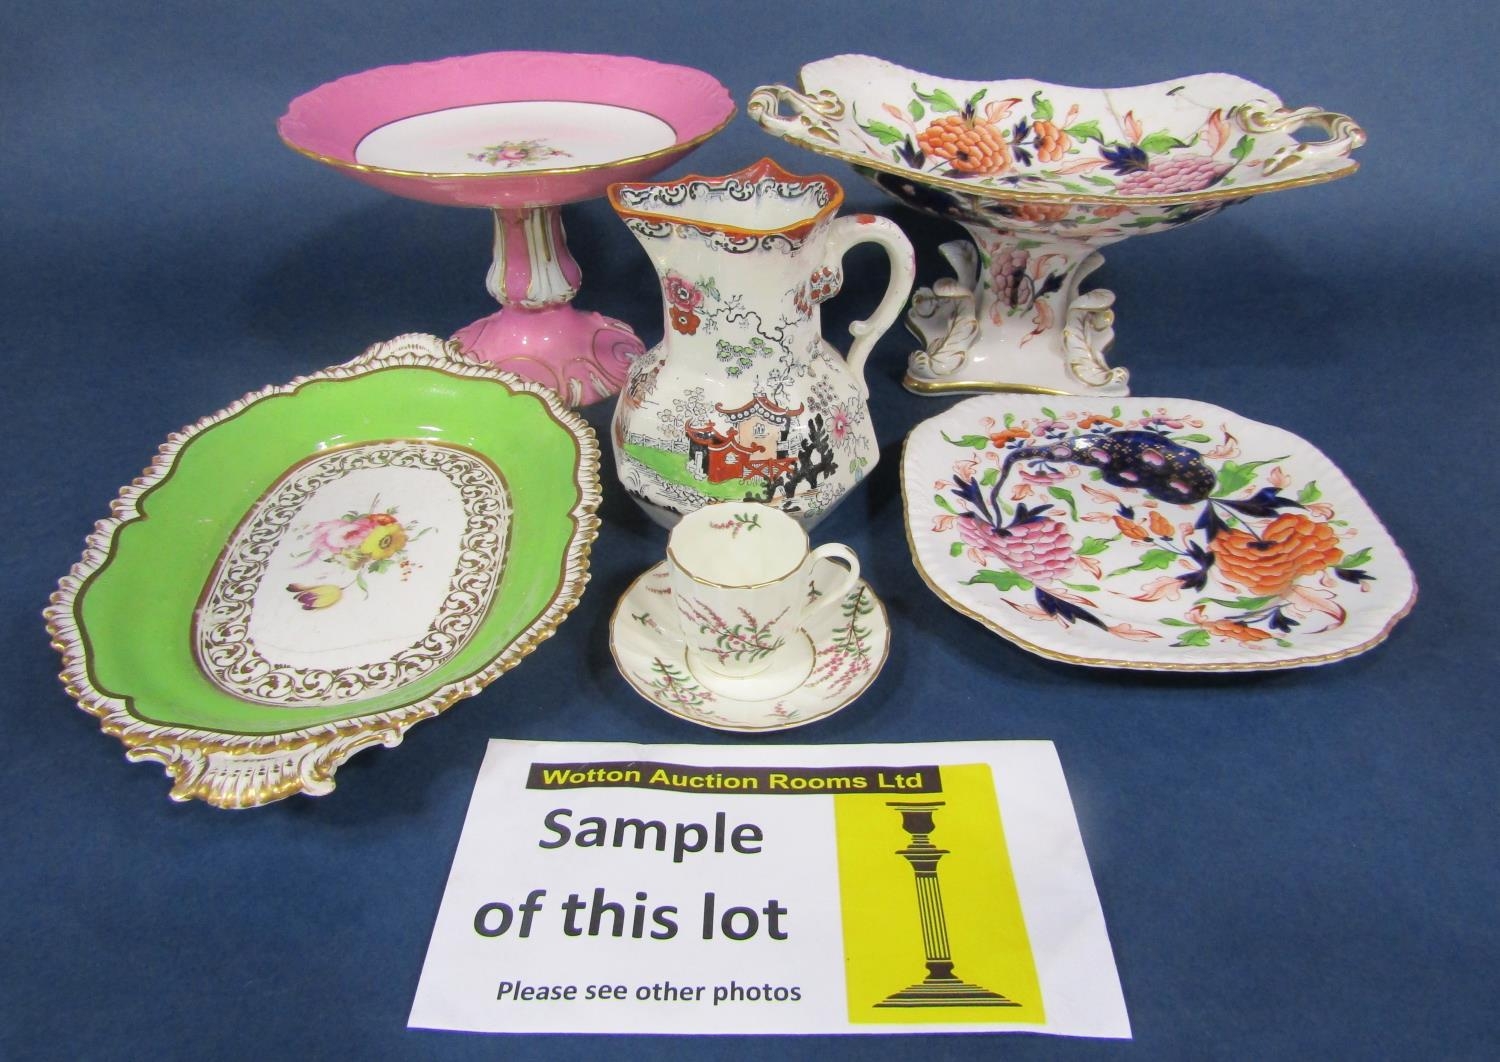 A collection of early 19th century dessert wares with painted and gilded decoration in the